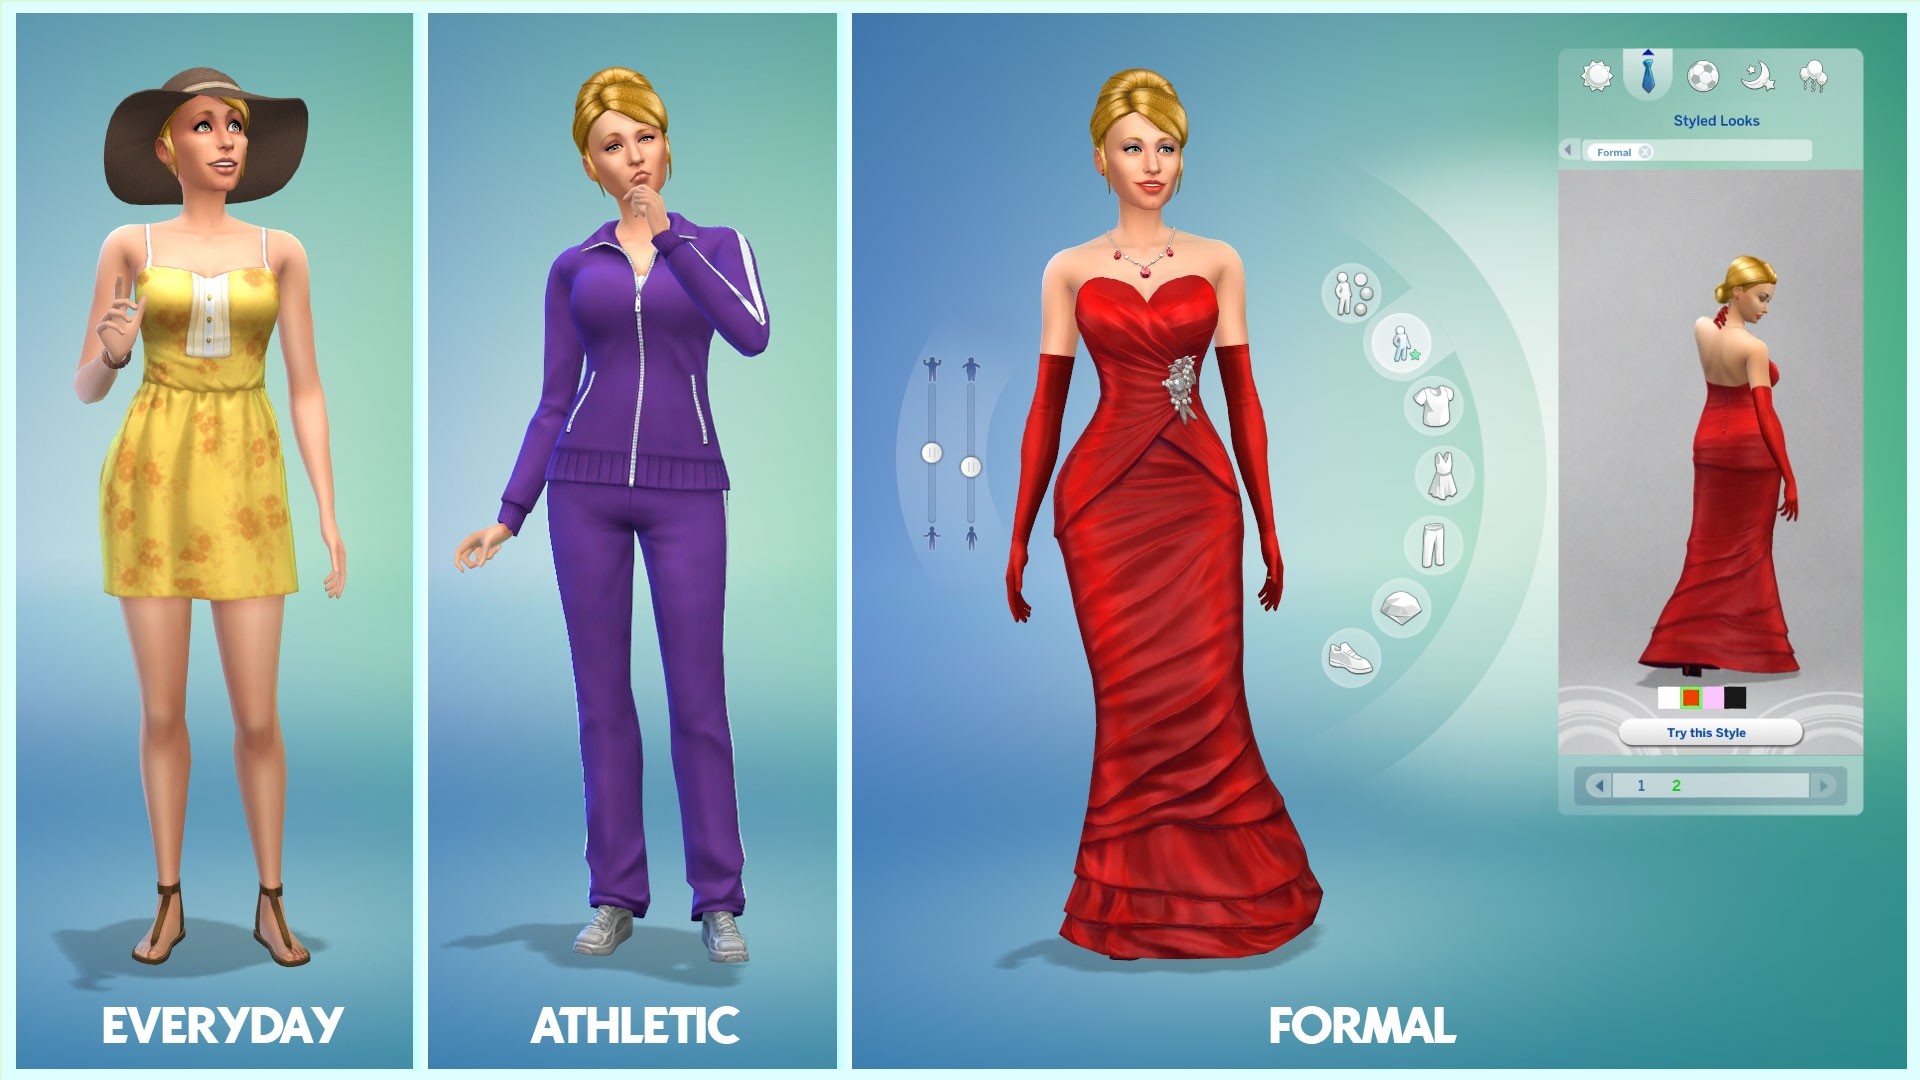 The Sims 4 Allows Deep Sim Customization Easy Online Interaction